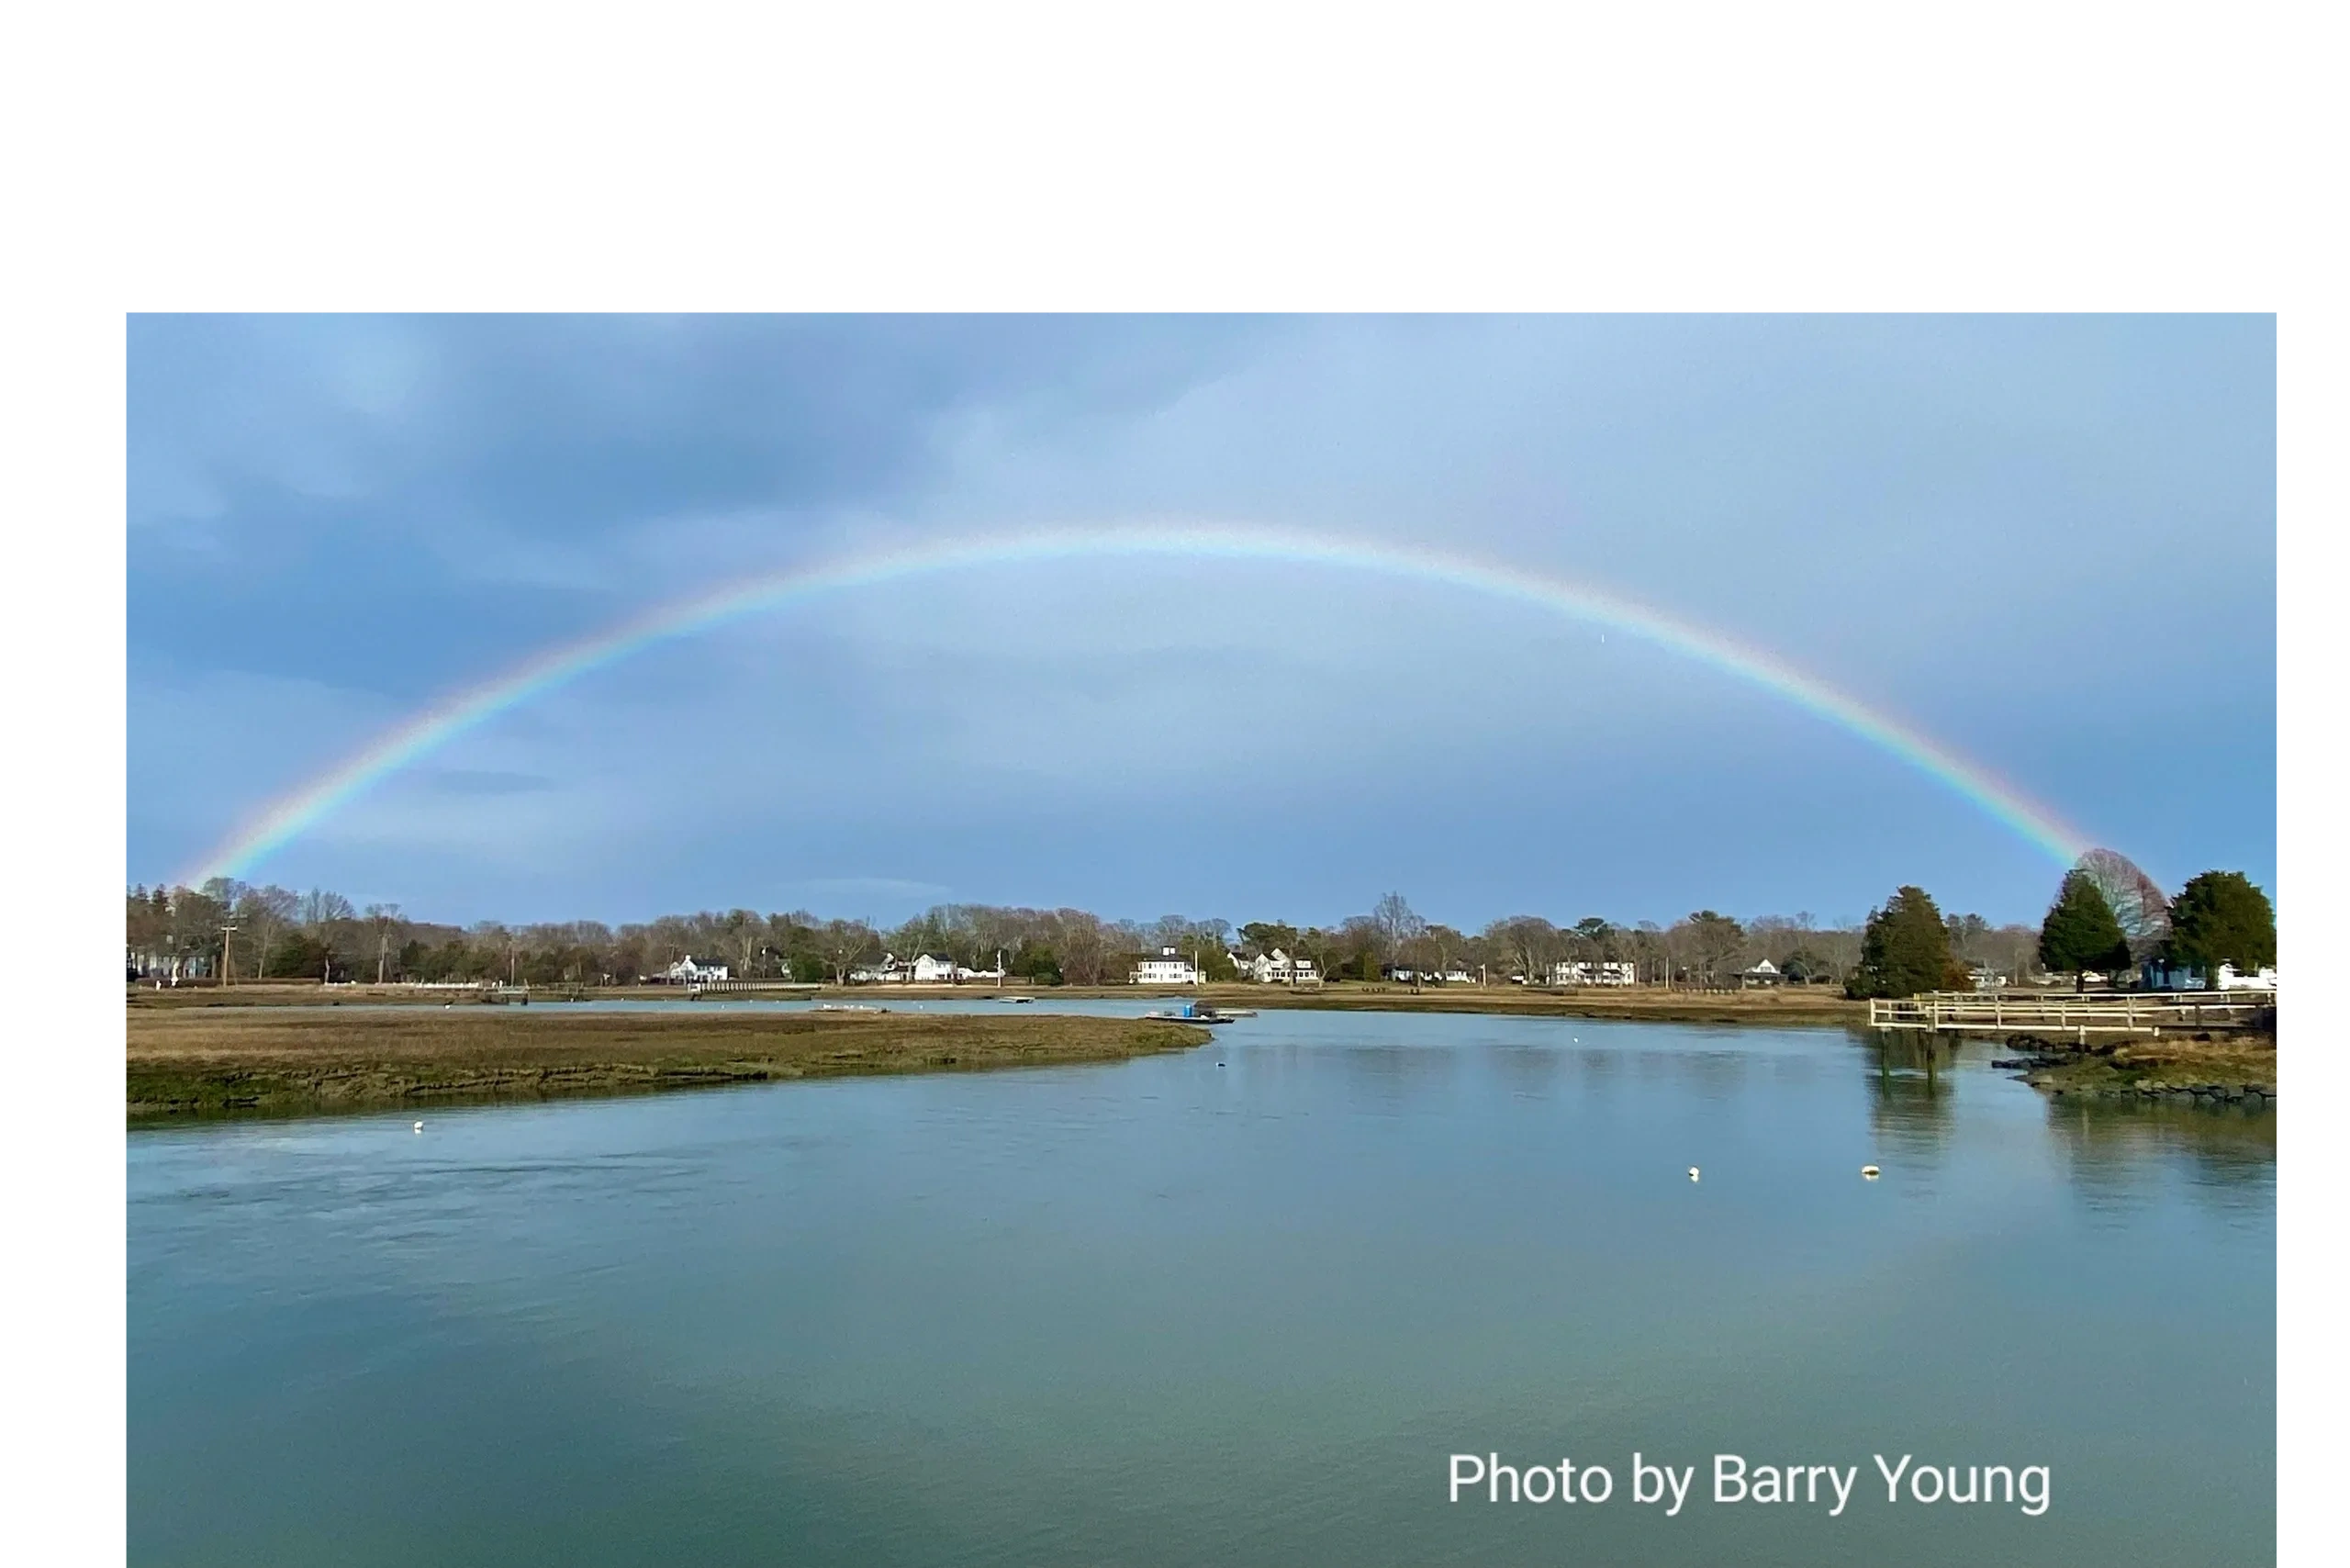 Photo of a rainbow over water in Duxbury